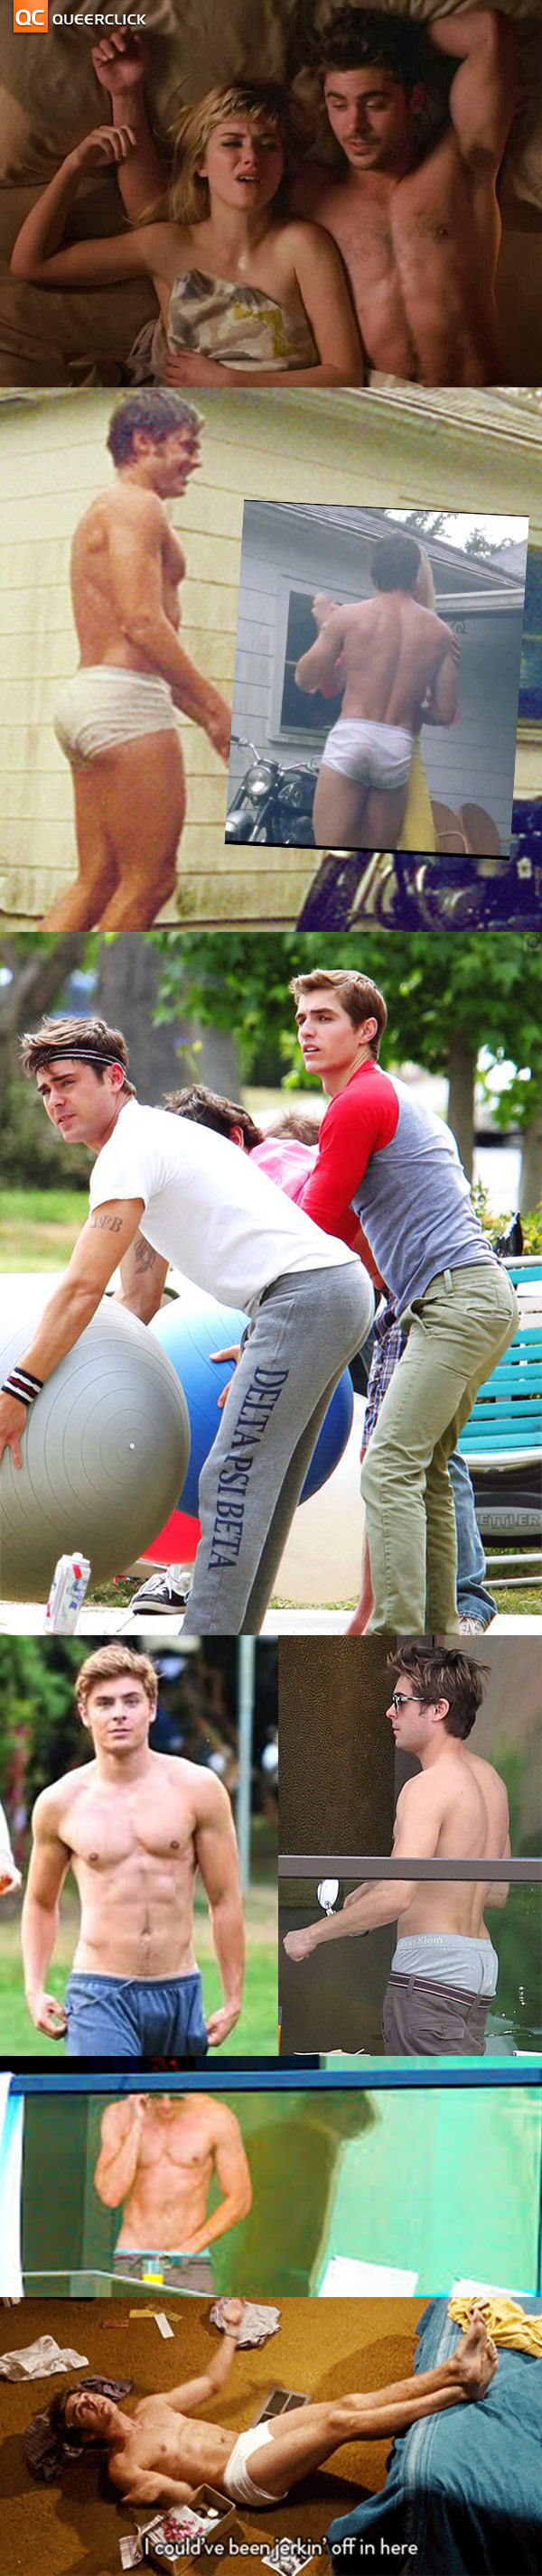 Zac Efron's Butt from That Awkward Moment